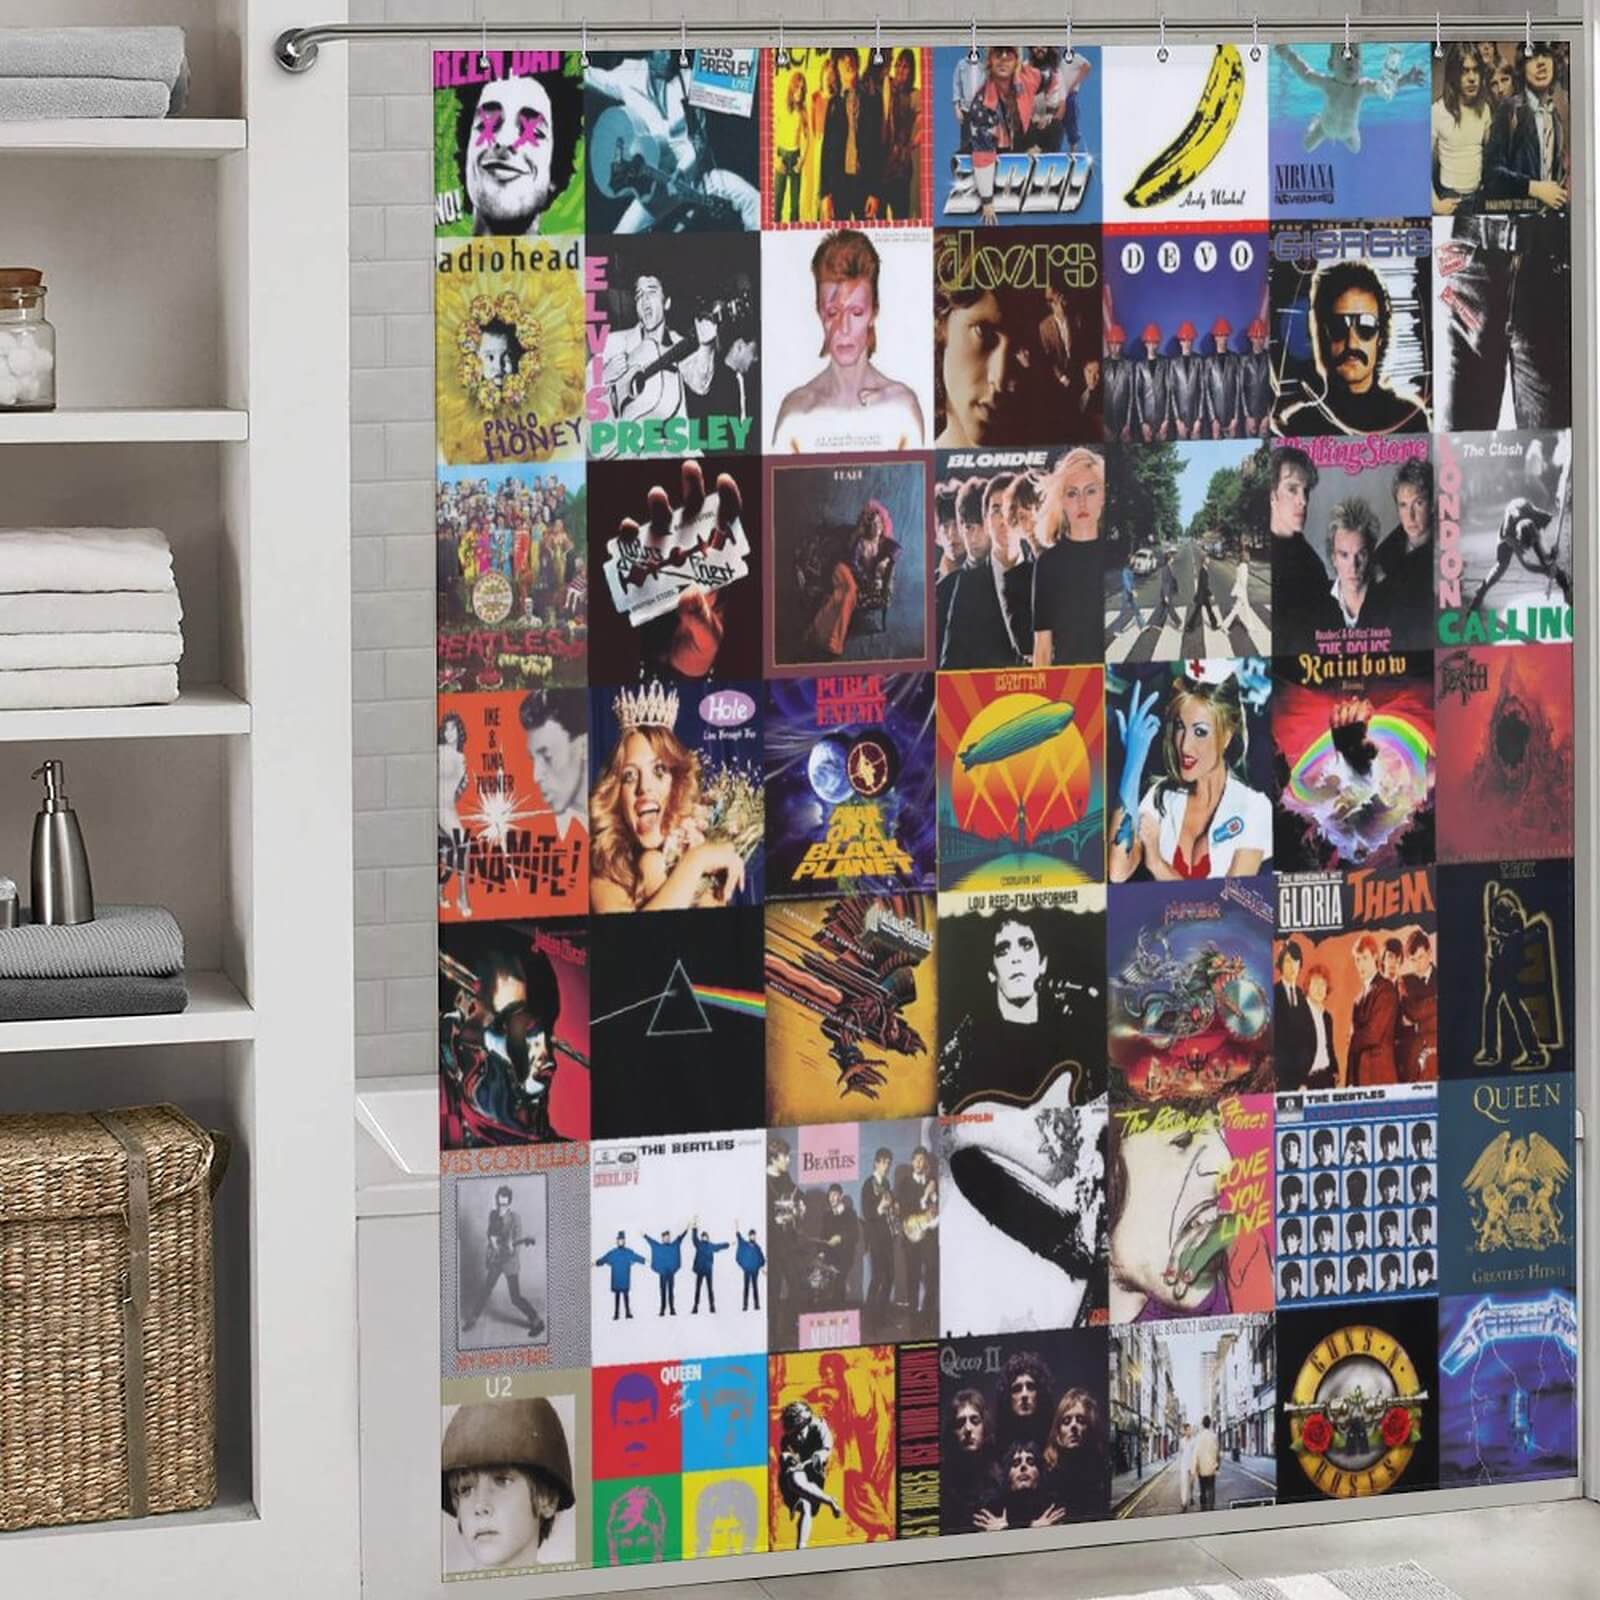 This Music Album Shower Curtain by Cotton Cat is a must-have for music enthusiasts who want to bring their favorite album covers into their bathroom. Experience the iconic imagery and timeless music of The Beatles every time you step into your bathroom with Cotton Cat.